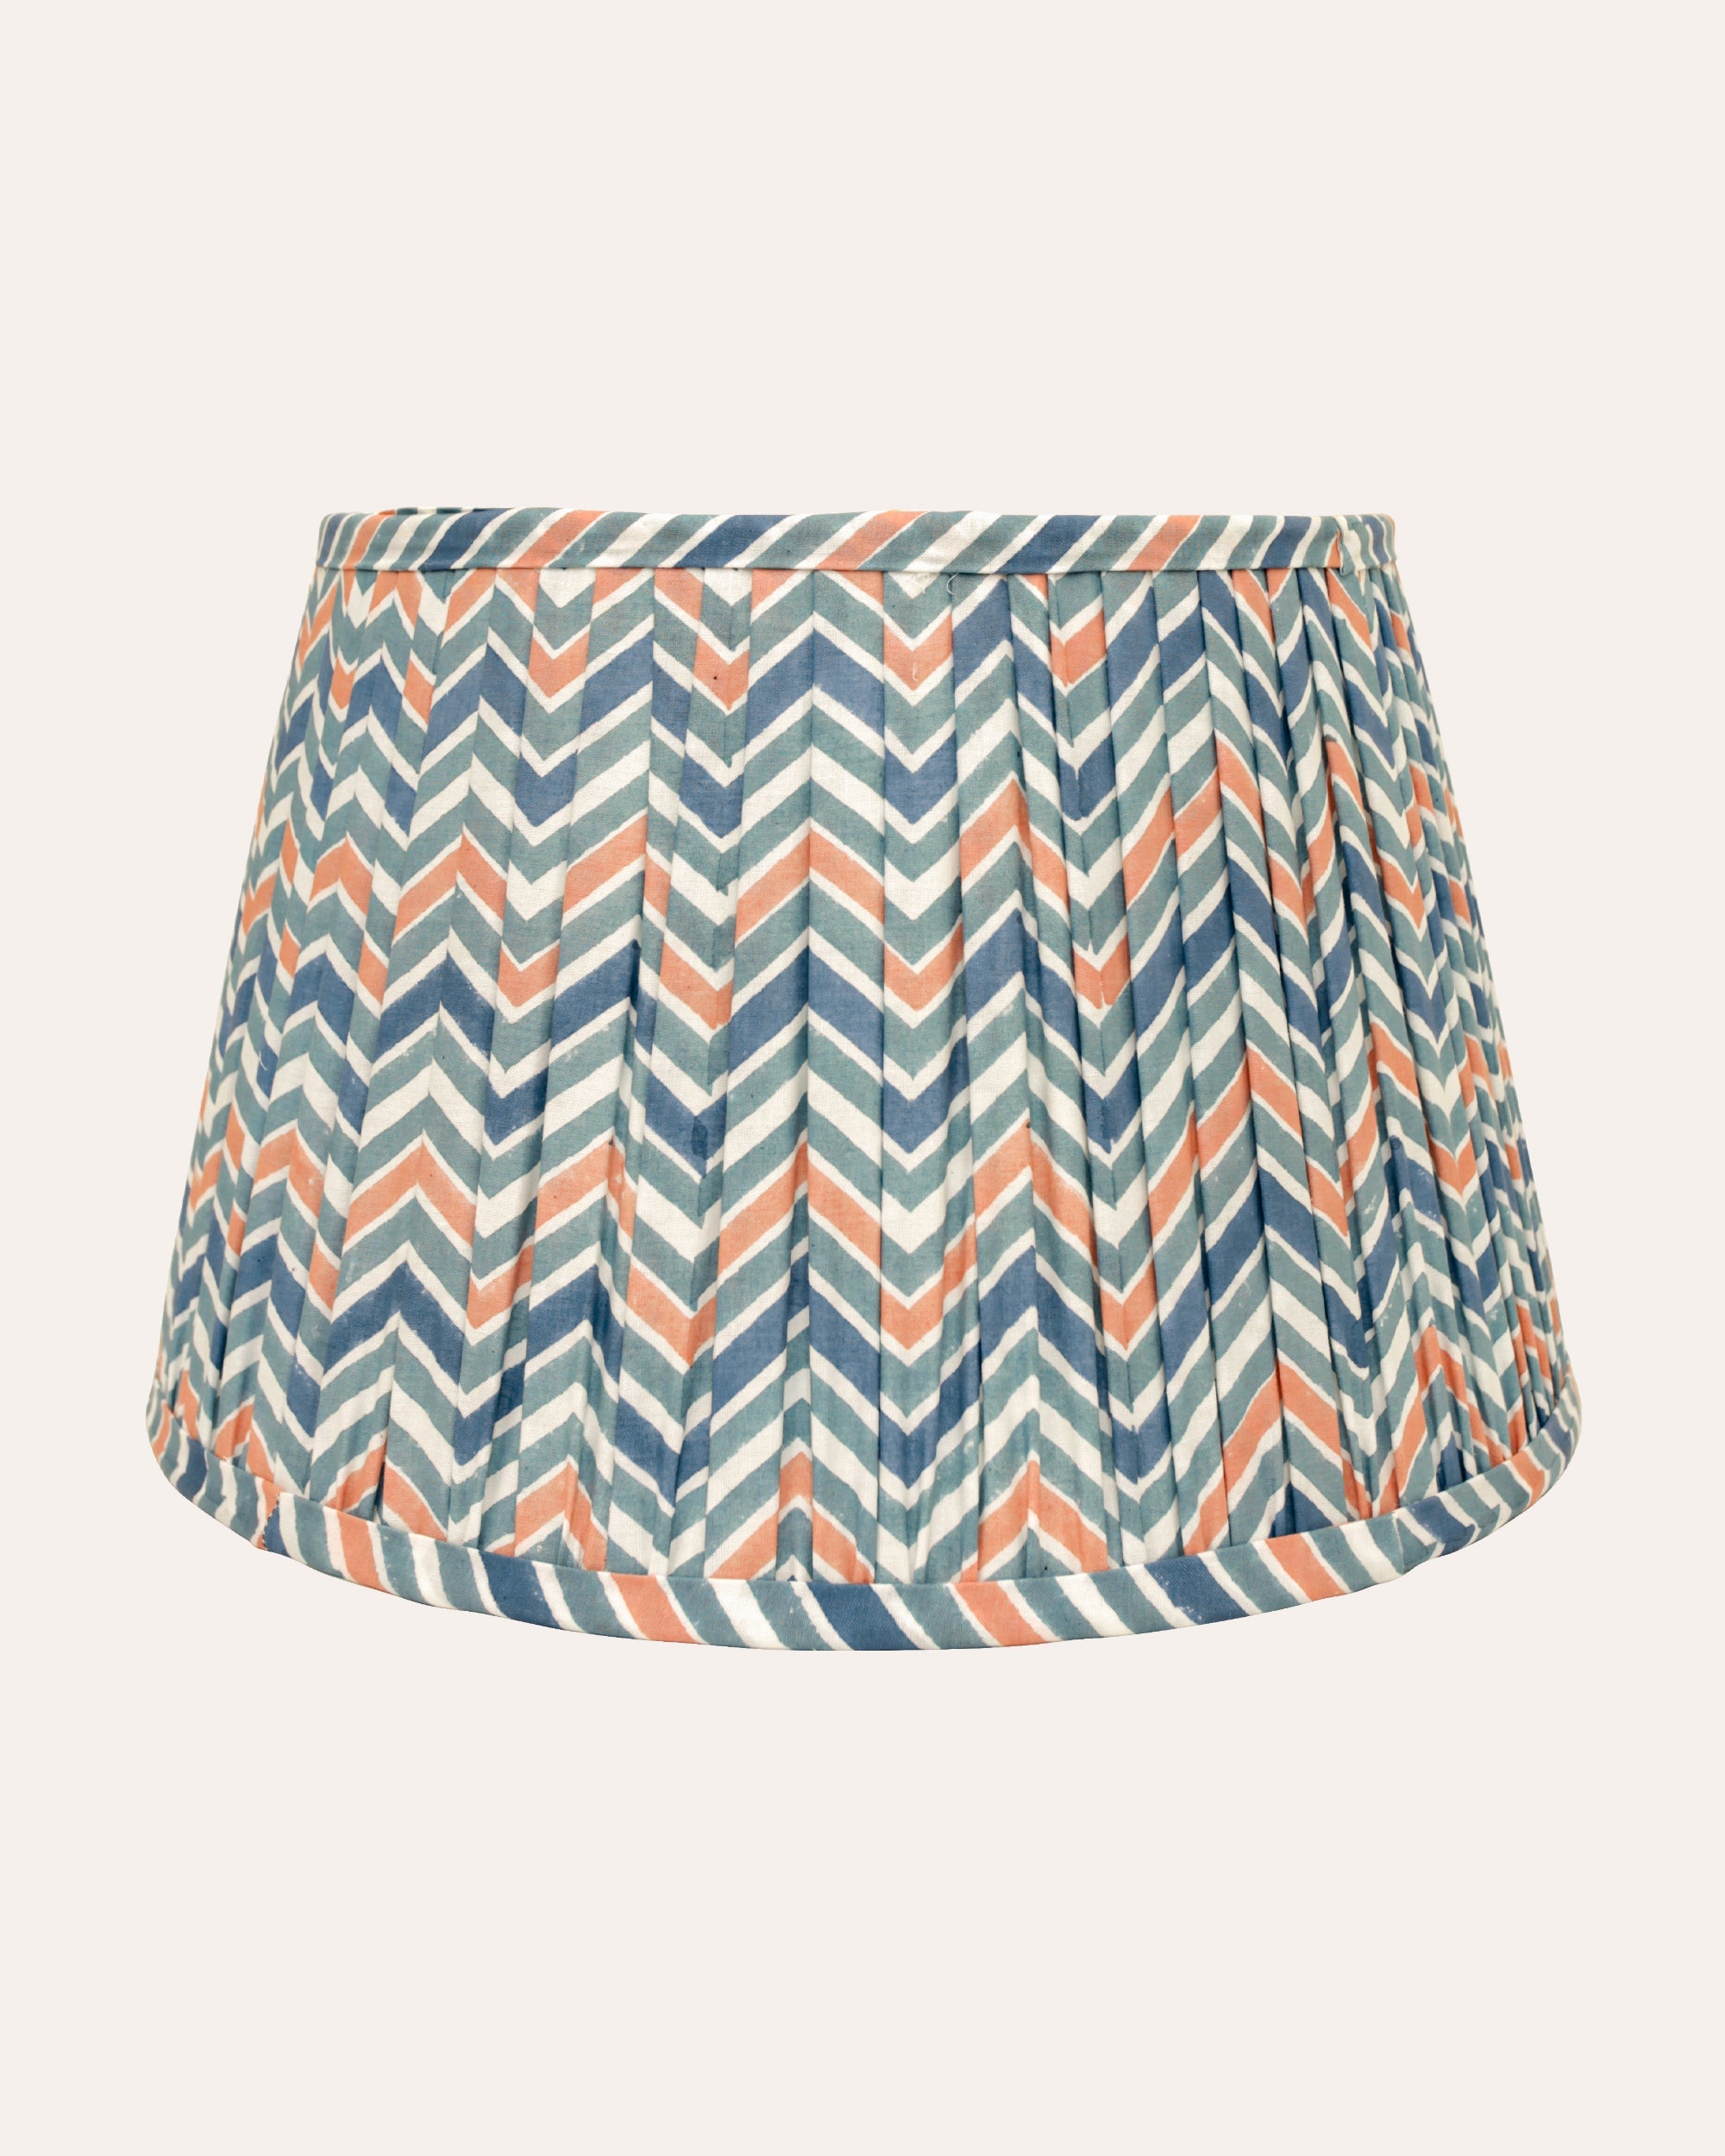 Piazza Pleated Lampshade - Blue and Pink